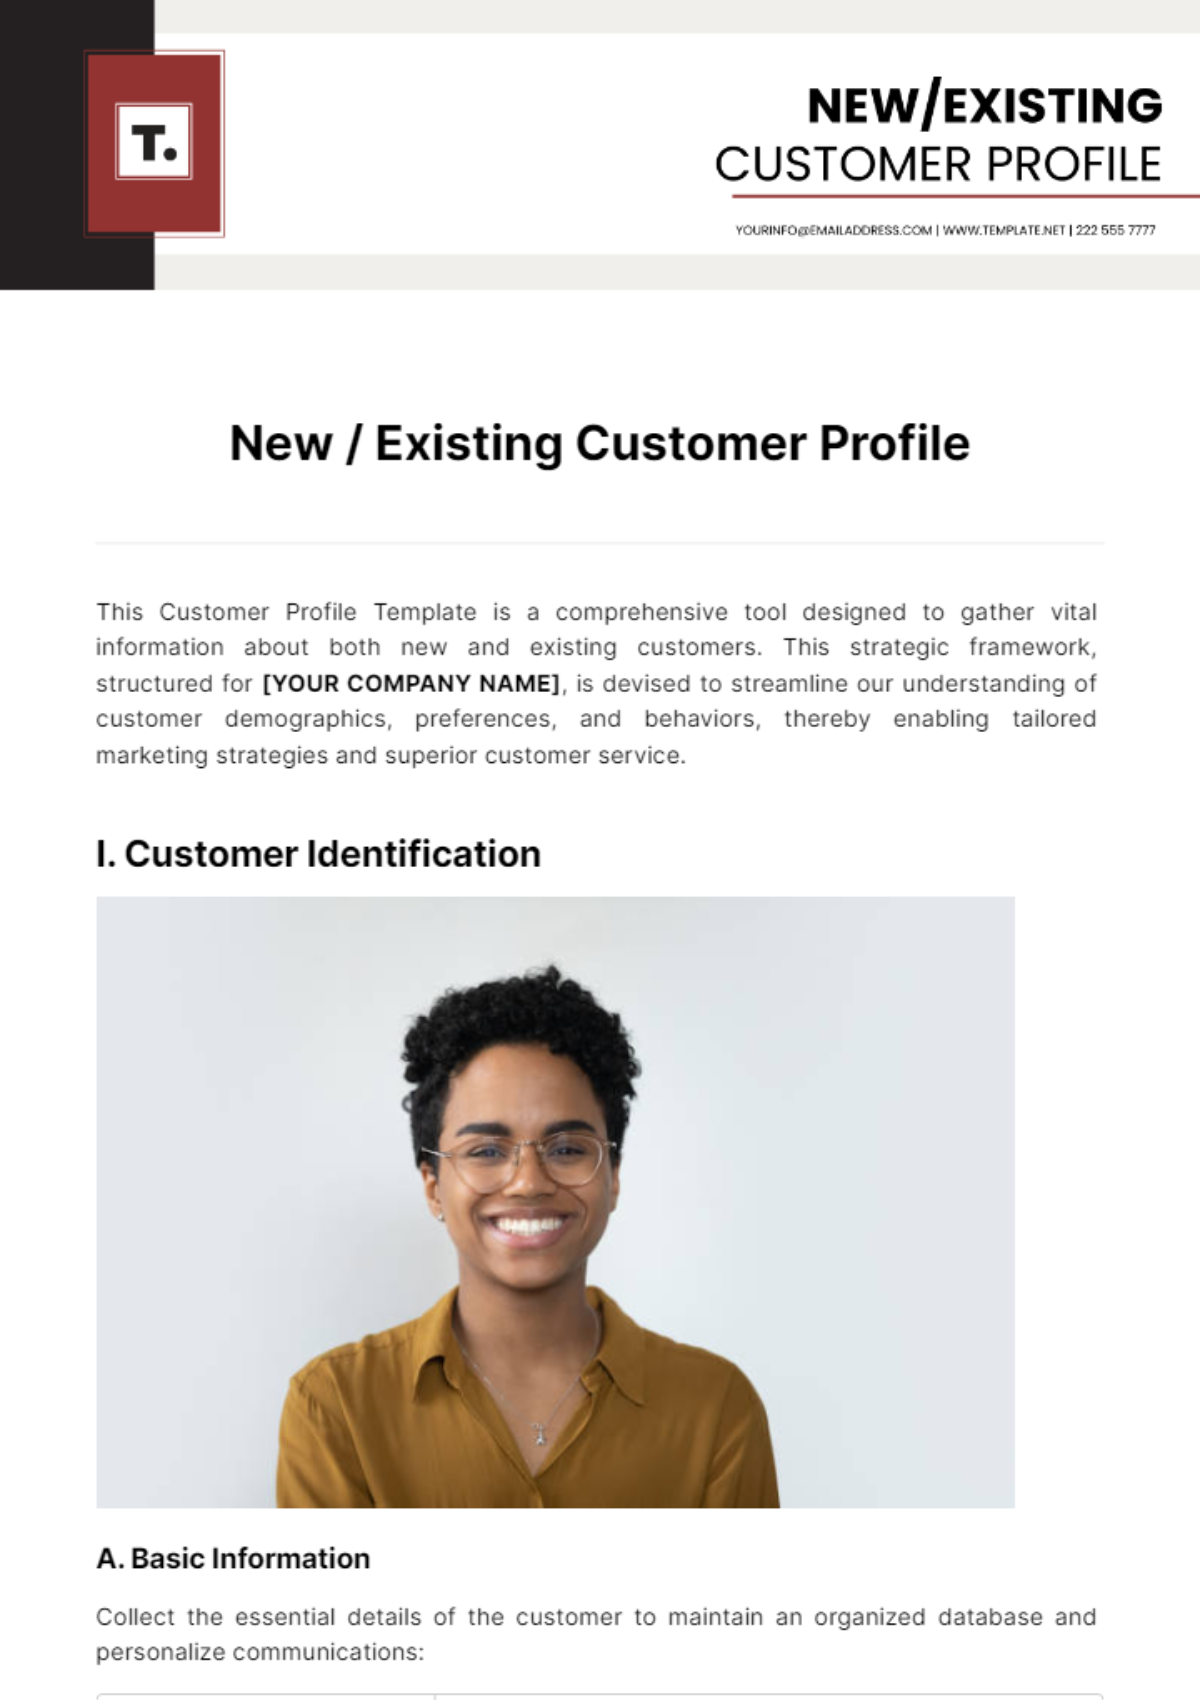 New / Existing Customer Profile Template